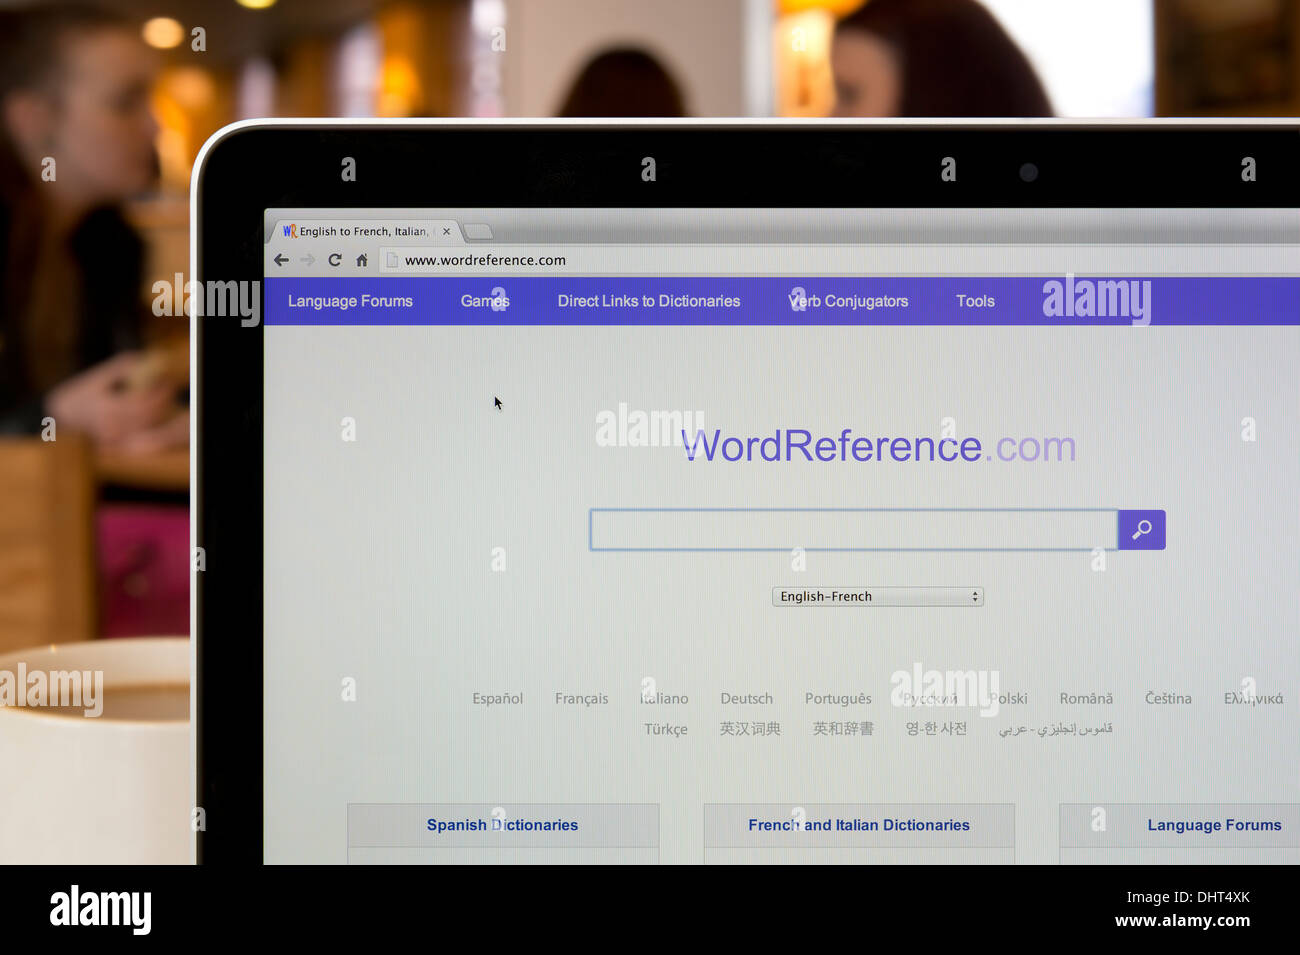 The Word Reference website shot in a coffee shop environment (Editorial use only: print, TV, e-book and editorial website). Stock Photo